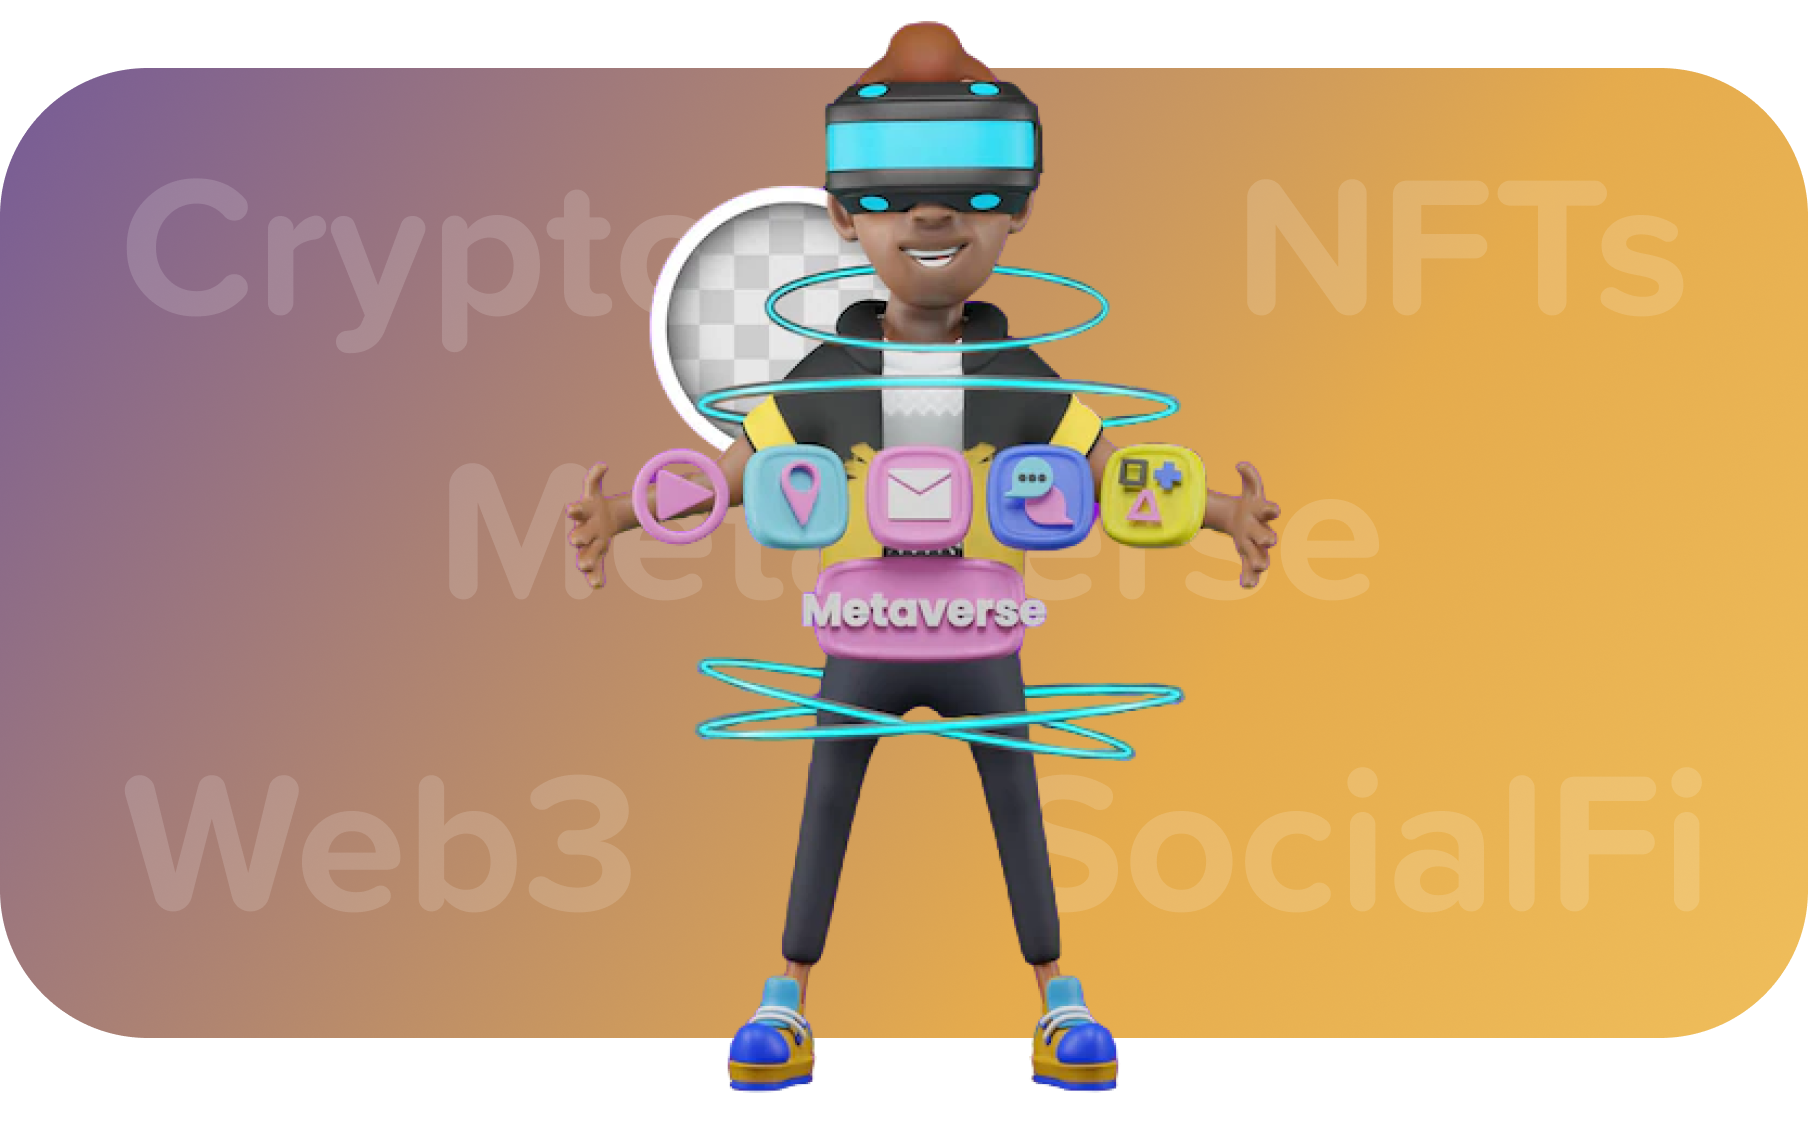 Crypto, NFTs and now SocialFi. Web3.0 is enabling users with a range of tools to interact with others in a more engaging way.